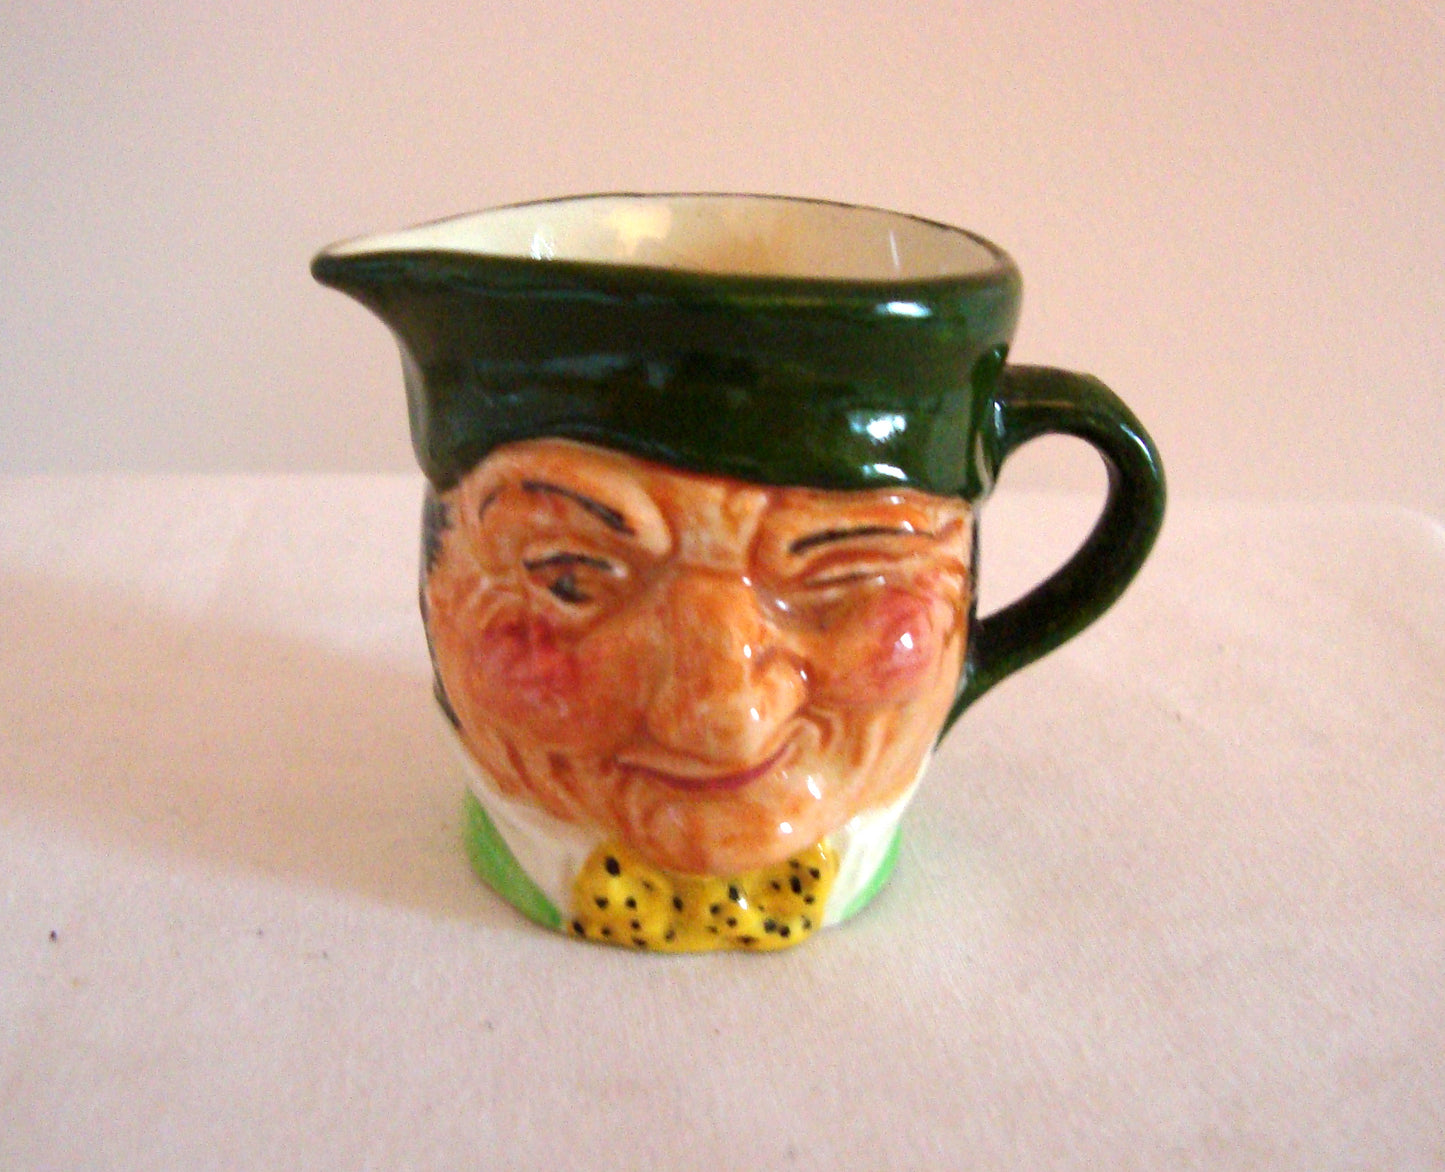 Hand Painted Artone 'Old Charley' Character Jugs